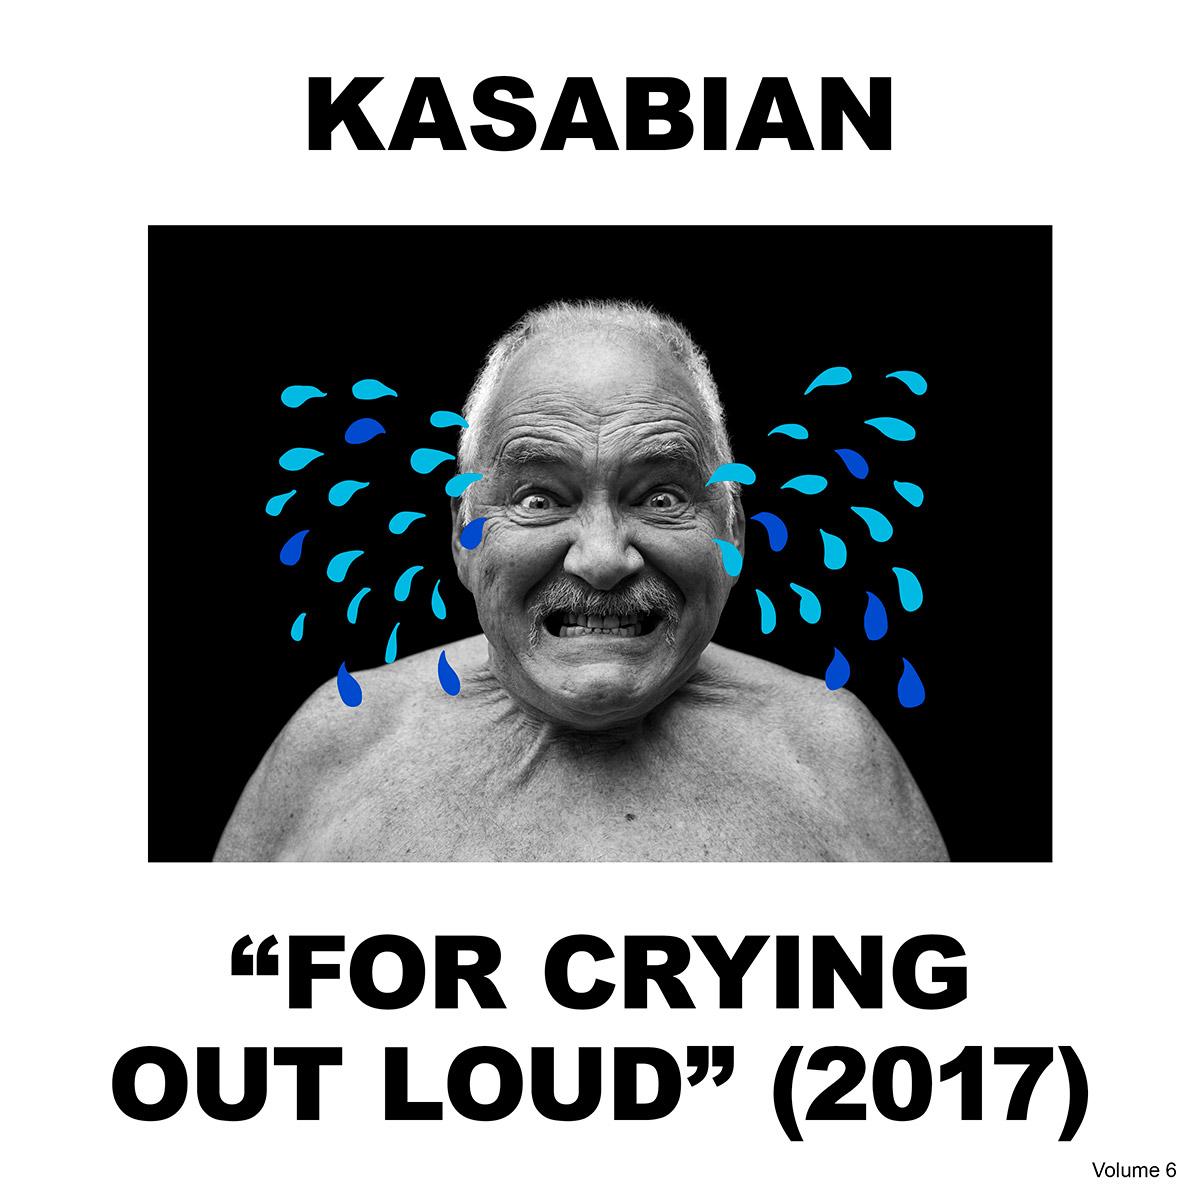 Okładka płyty &quot;For Crying Out Loud&quot; Kasabian 